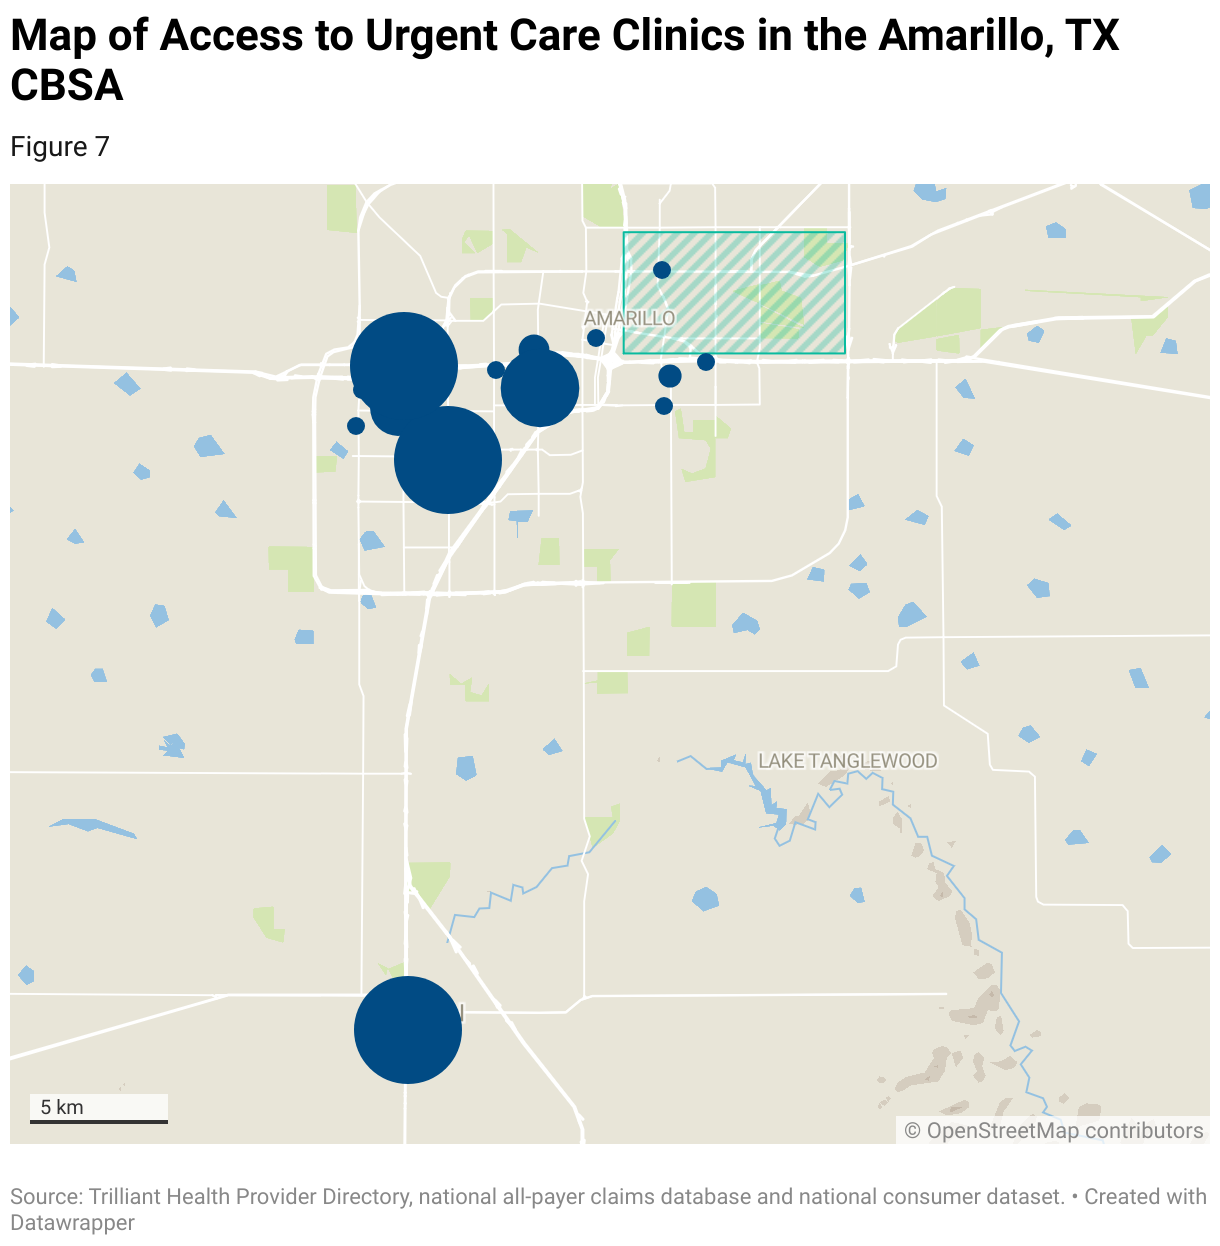 Map of urgent care clinics and volumes in the health system’s service area